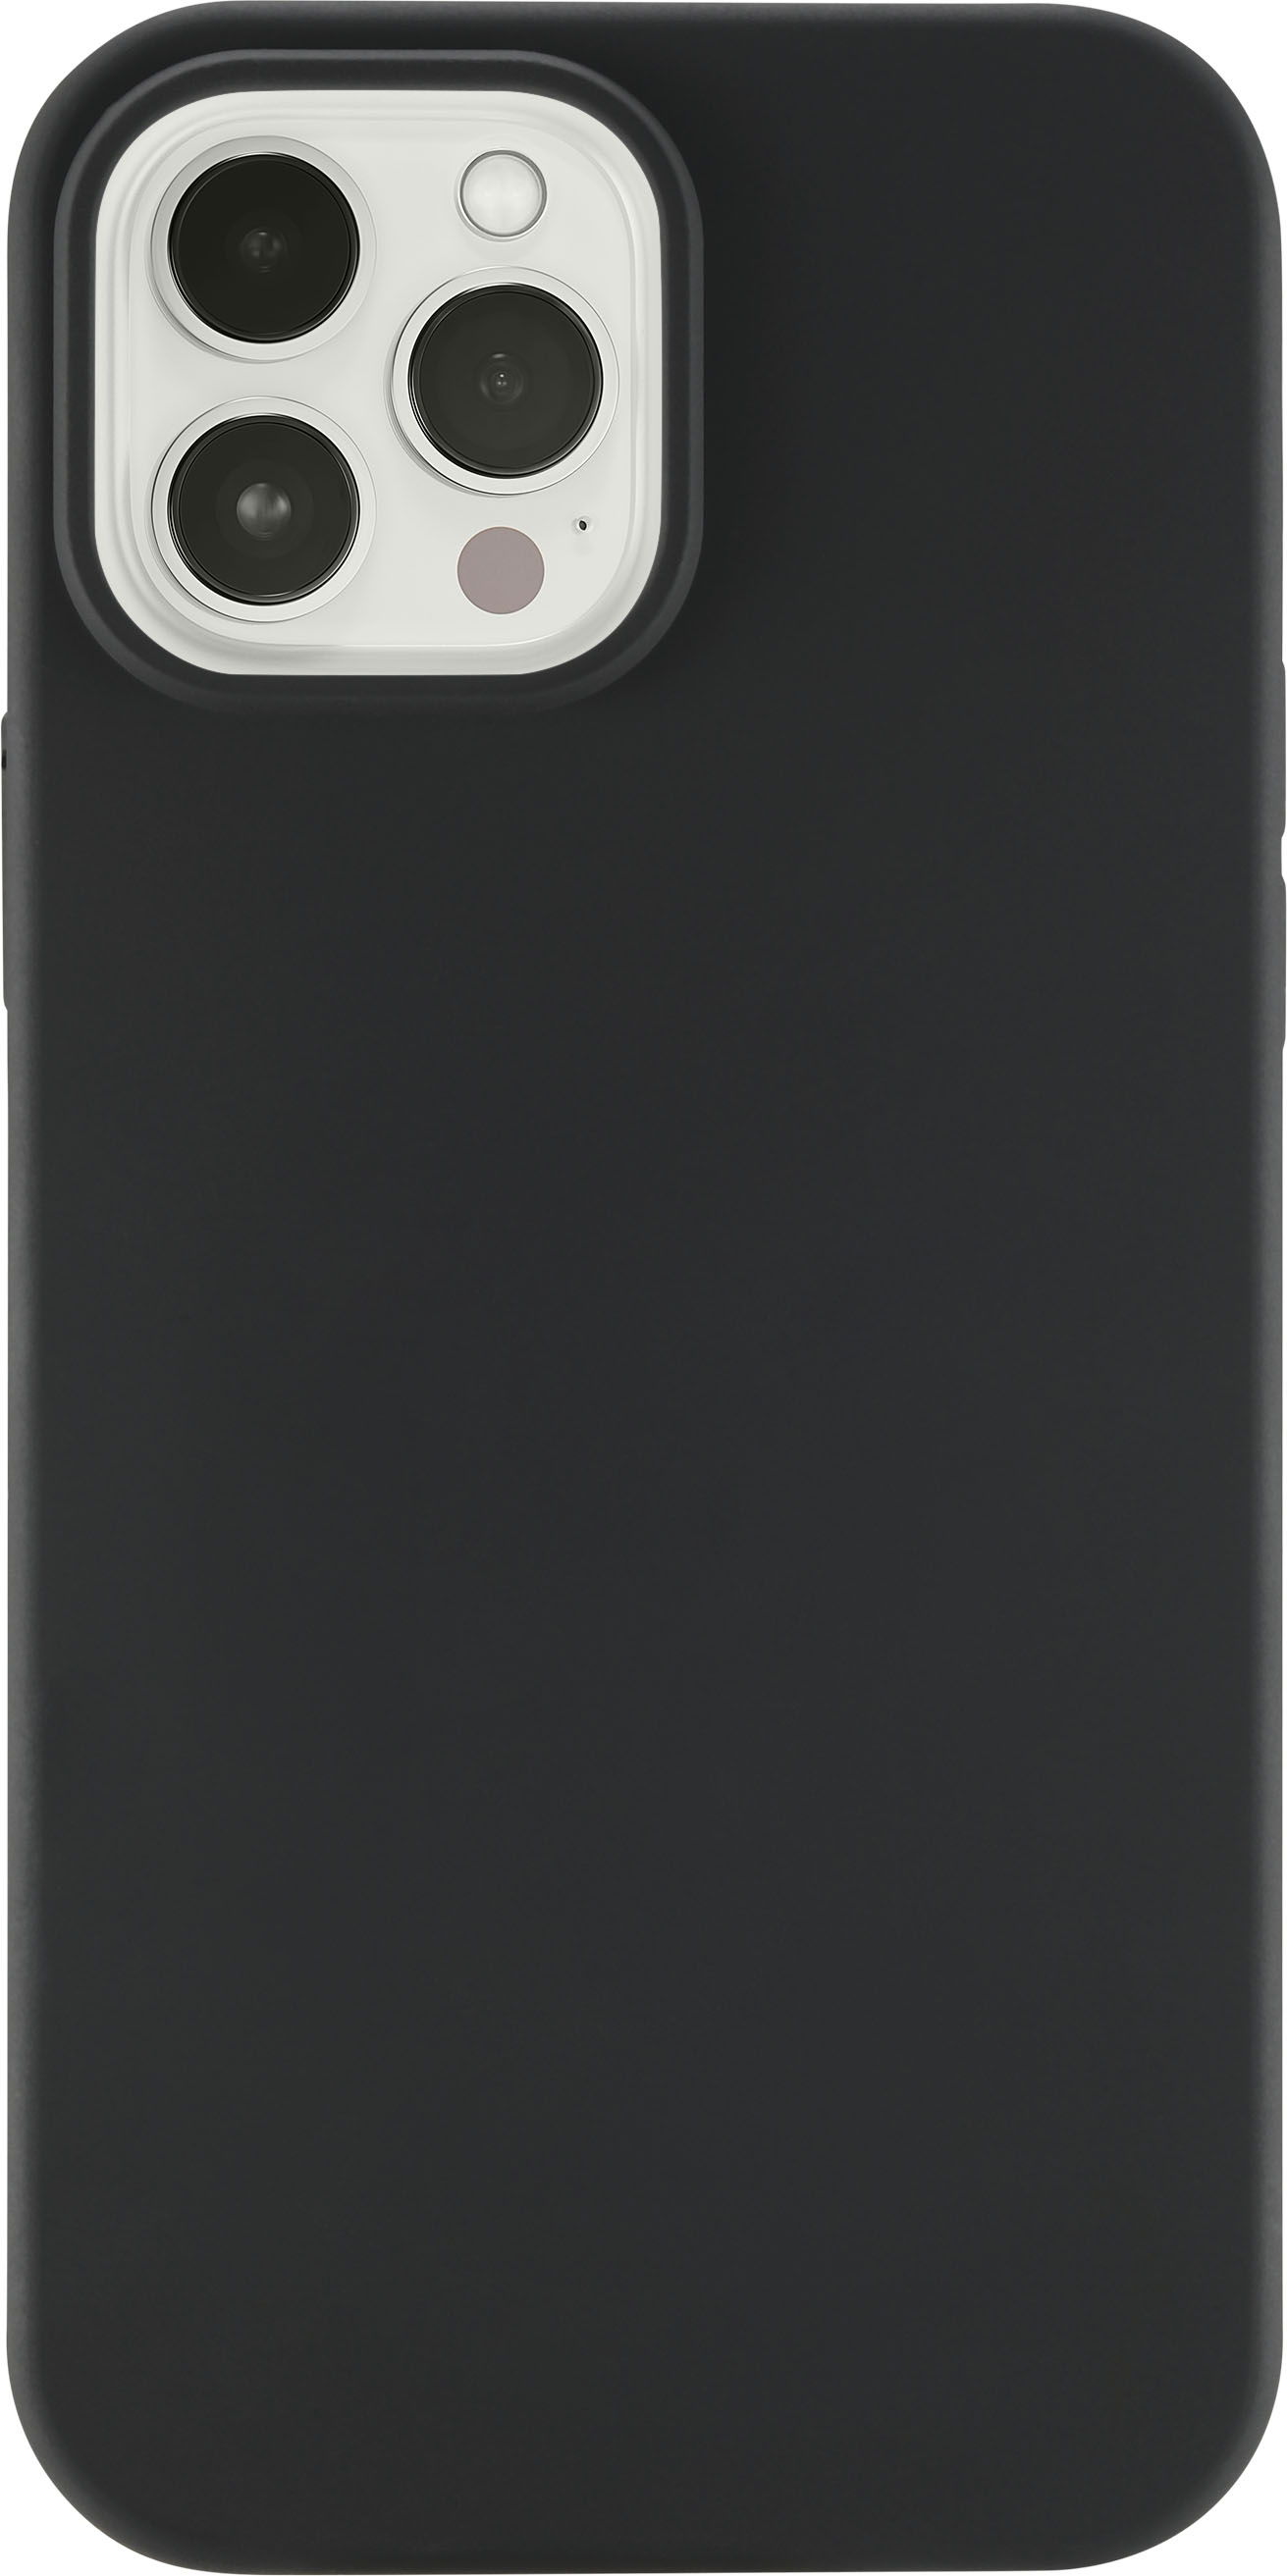 Will Cases Made For the iPhone 13 Pro Fit the iPhone 12 Pro? – BlackBrook  Case